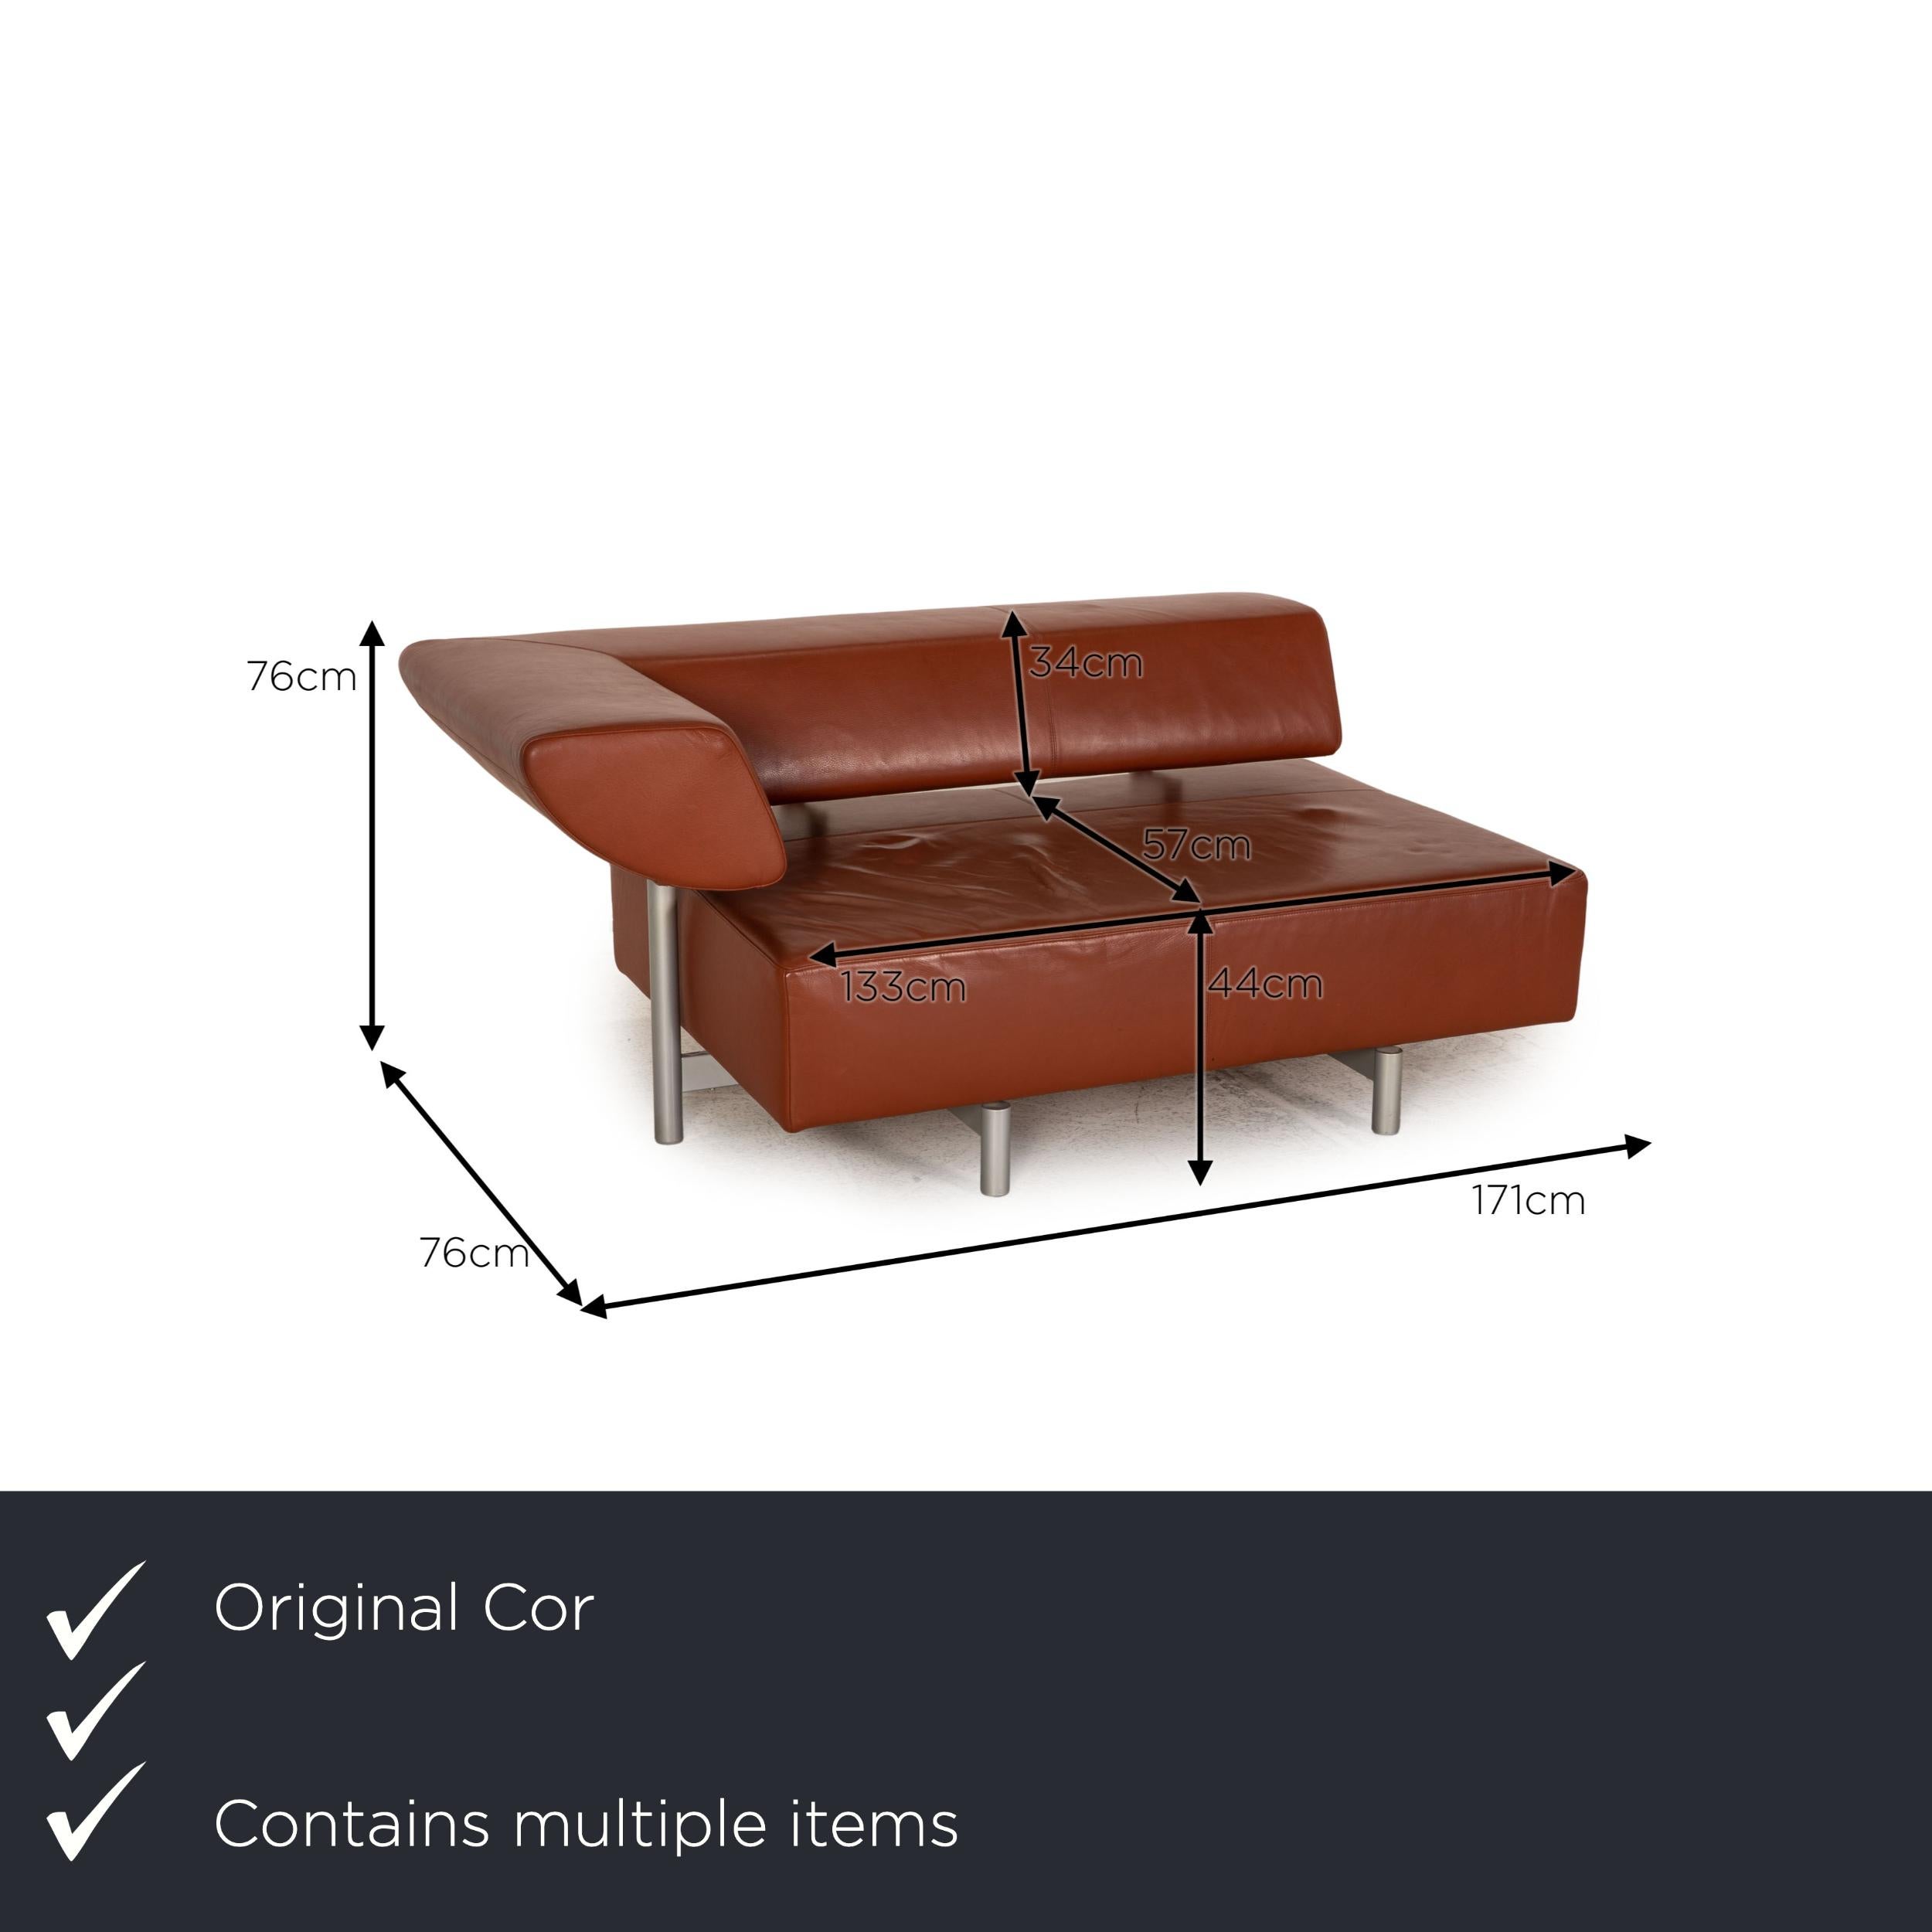 We present to you a Cor Arthe leather sofa set brown 2x two-seater stool.

Product measurements in centimeters:

Depth: 96
Width: 171
Height: 76
Seat height: 44
Rest height: 76
Seat depth: 57
Seat width: 133
Back height: 34.

    